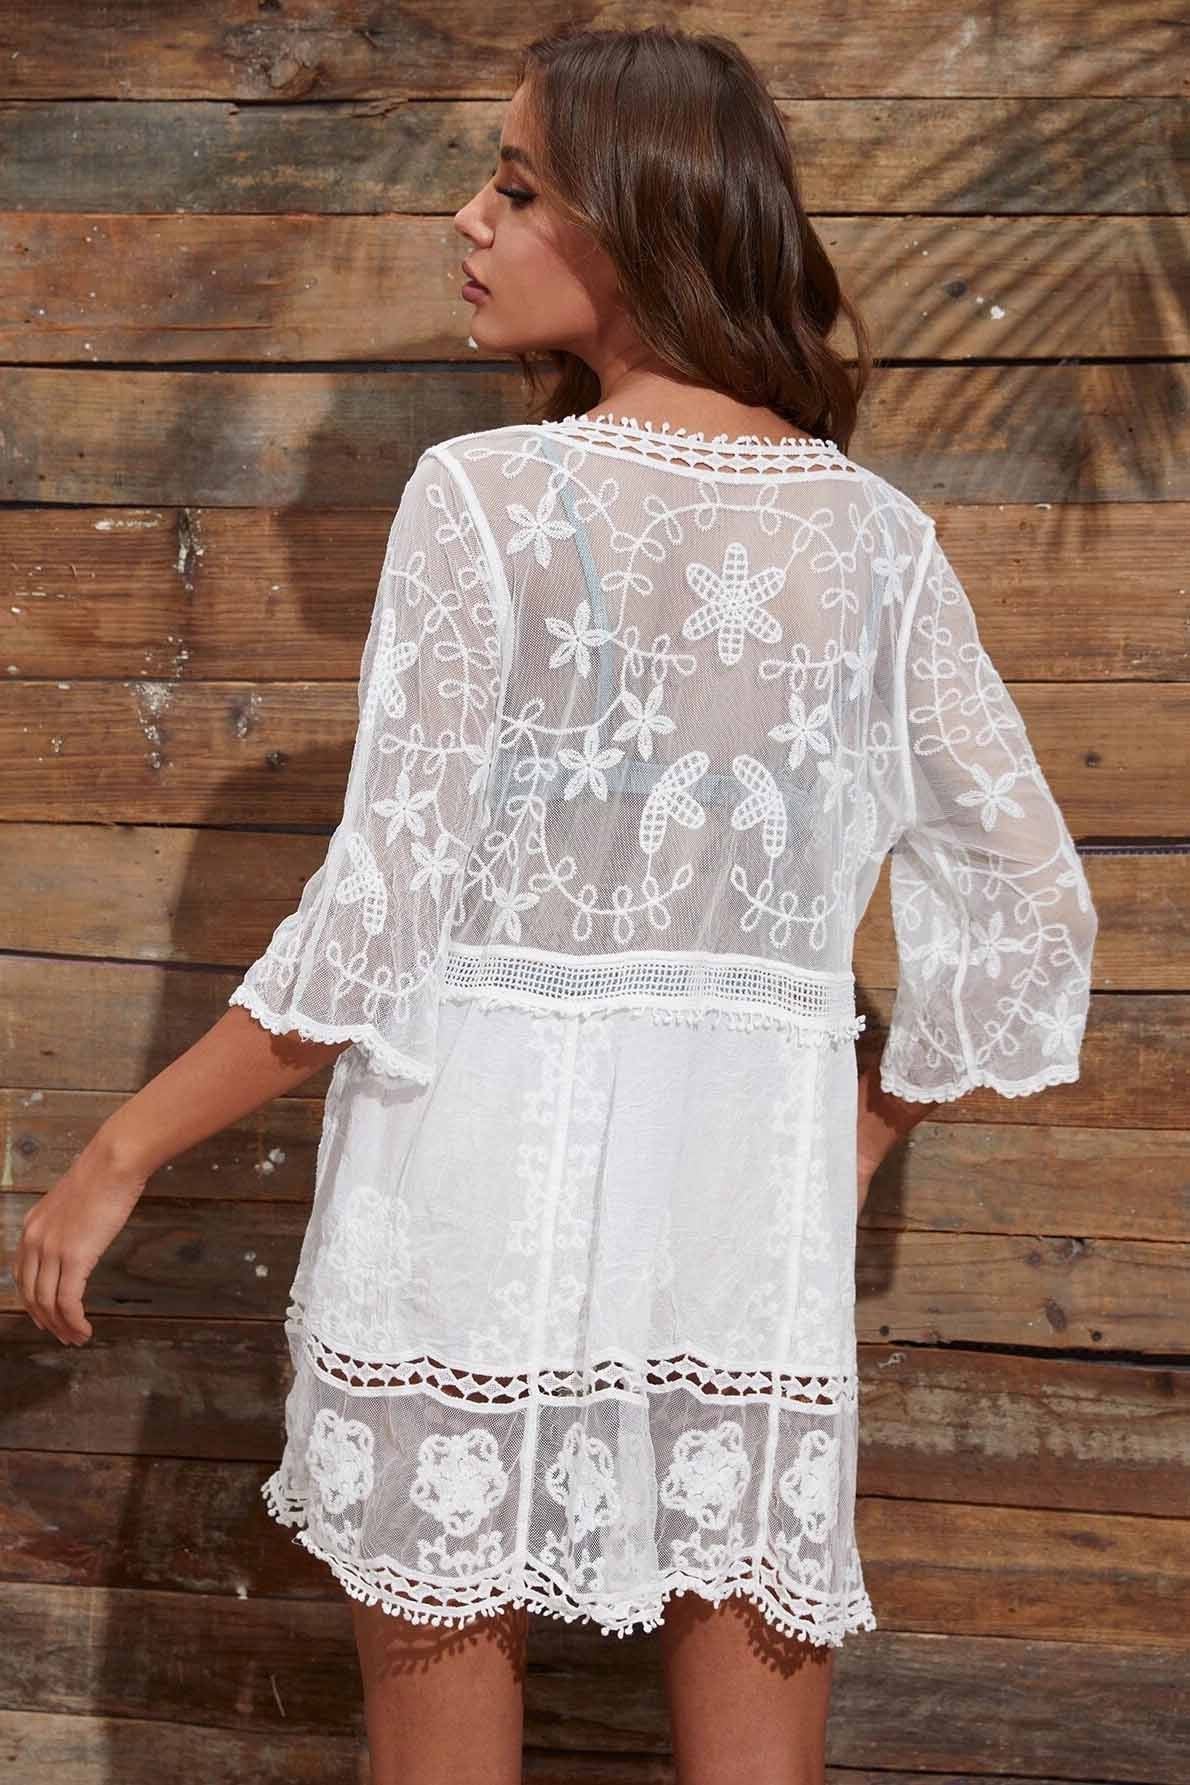 W LACE STITCHING BATHING SUIT COVER UP - AL9398